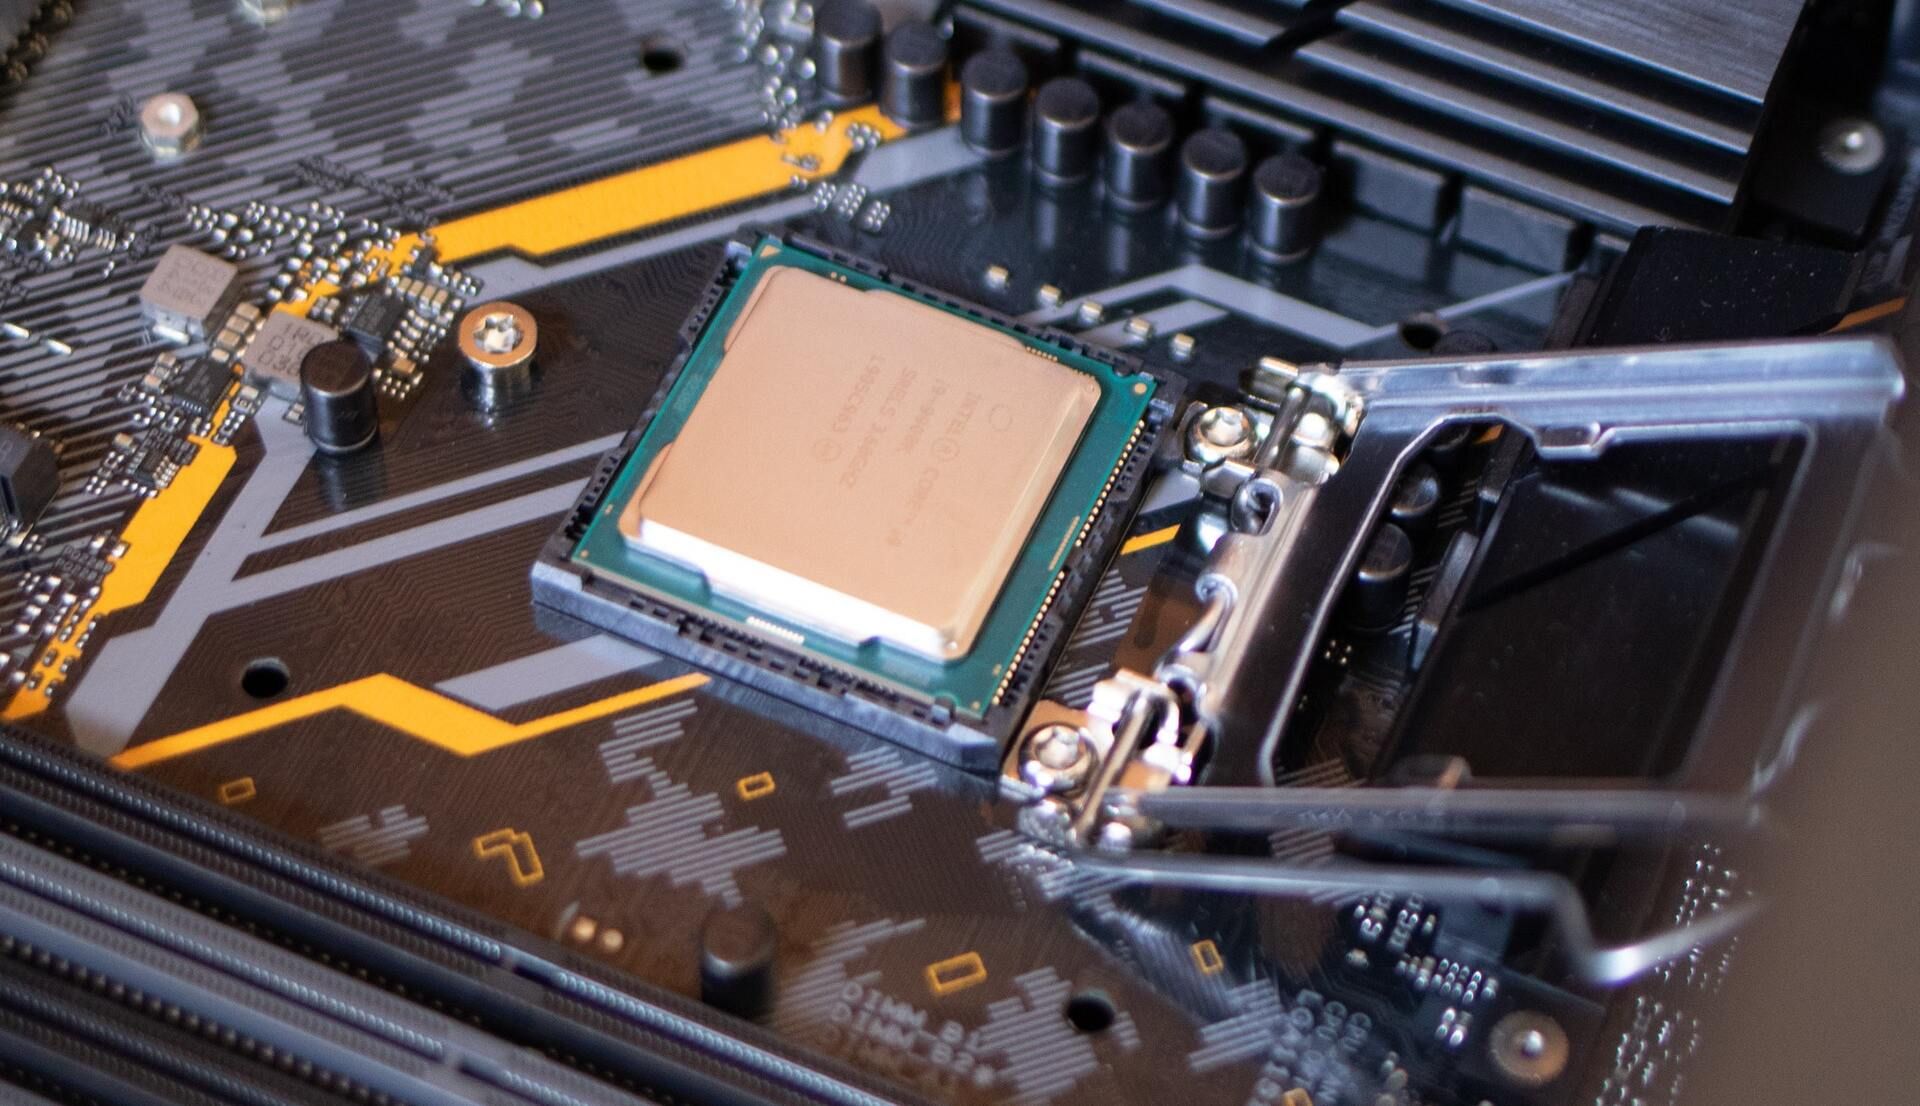 CPU placed in its slot on a motherboard.